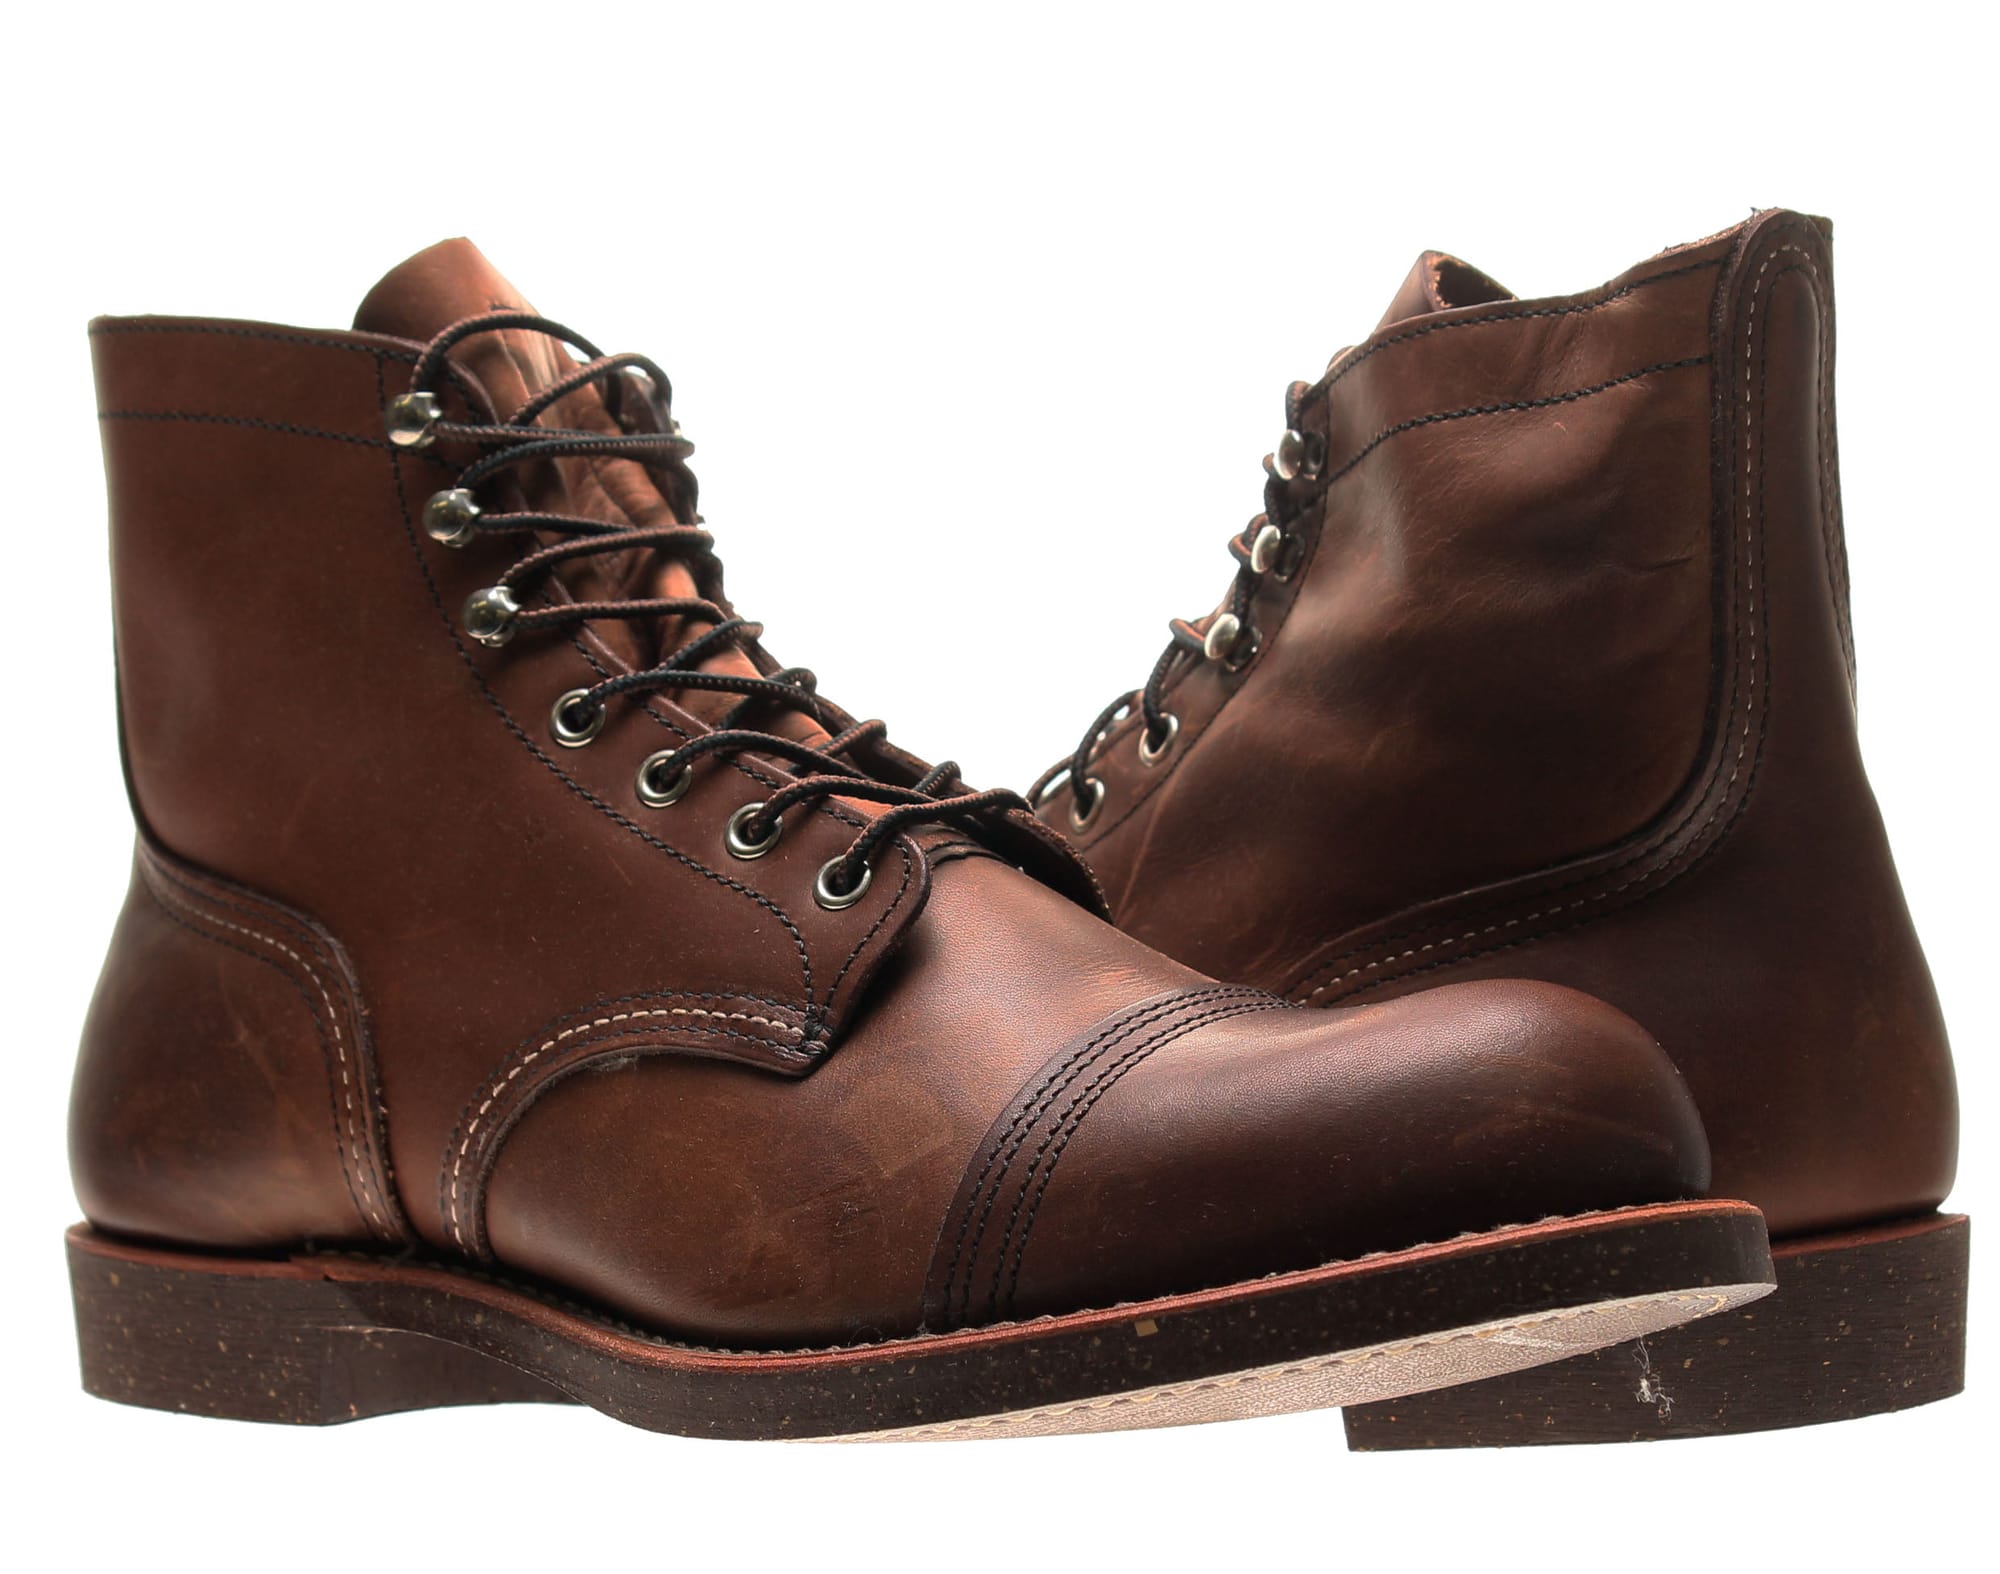 Red Wing Men's Iron Ranger boots in classic brown